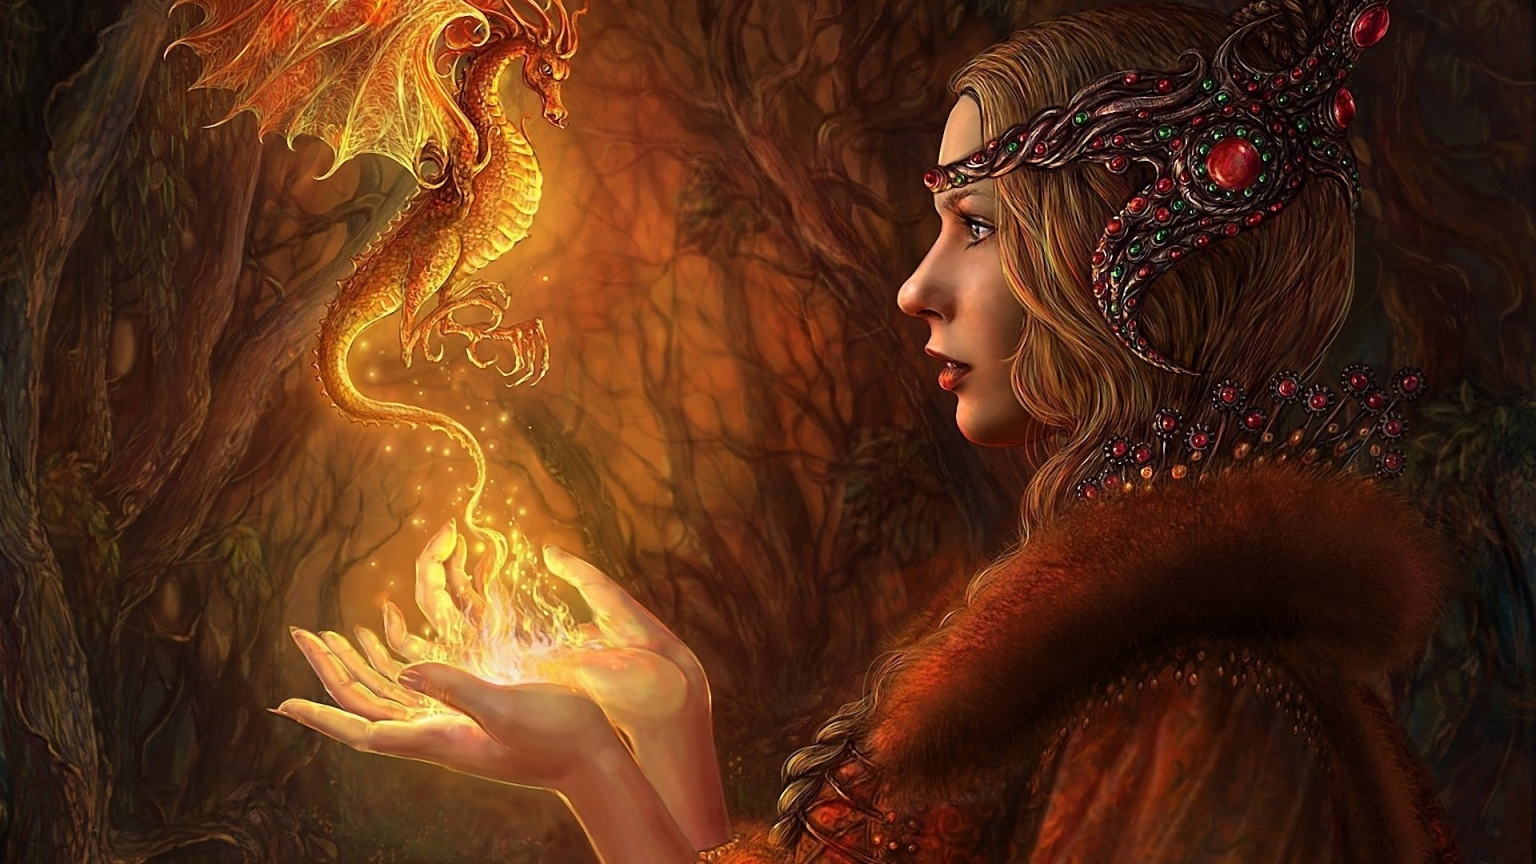 The Girl with Dragon for 1536 x 864 HDTV resolution